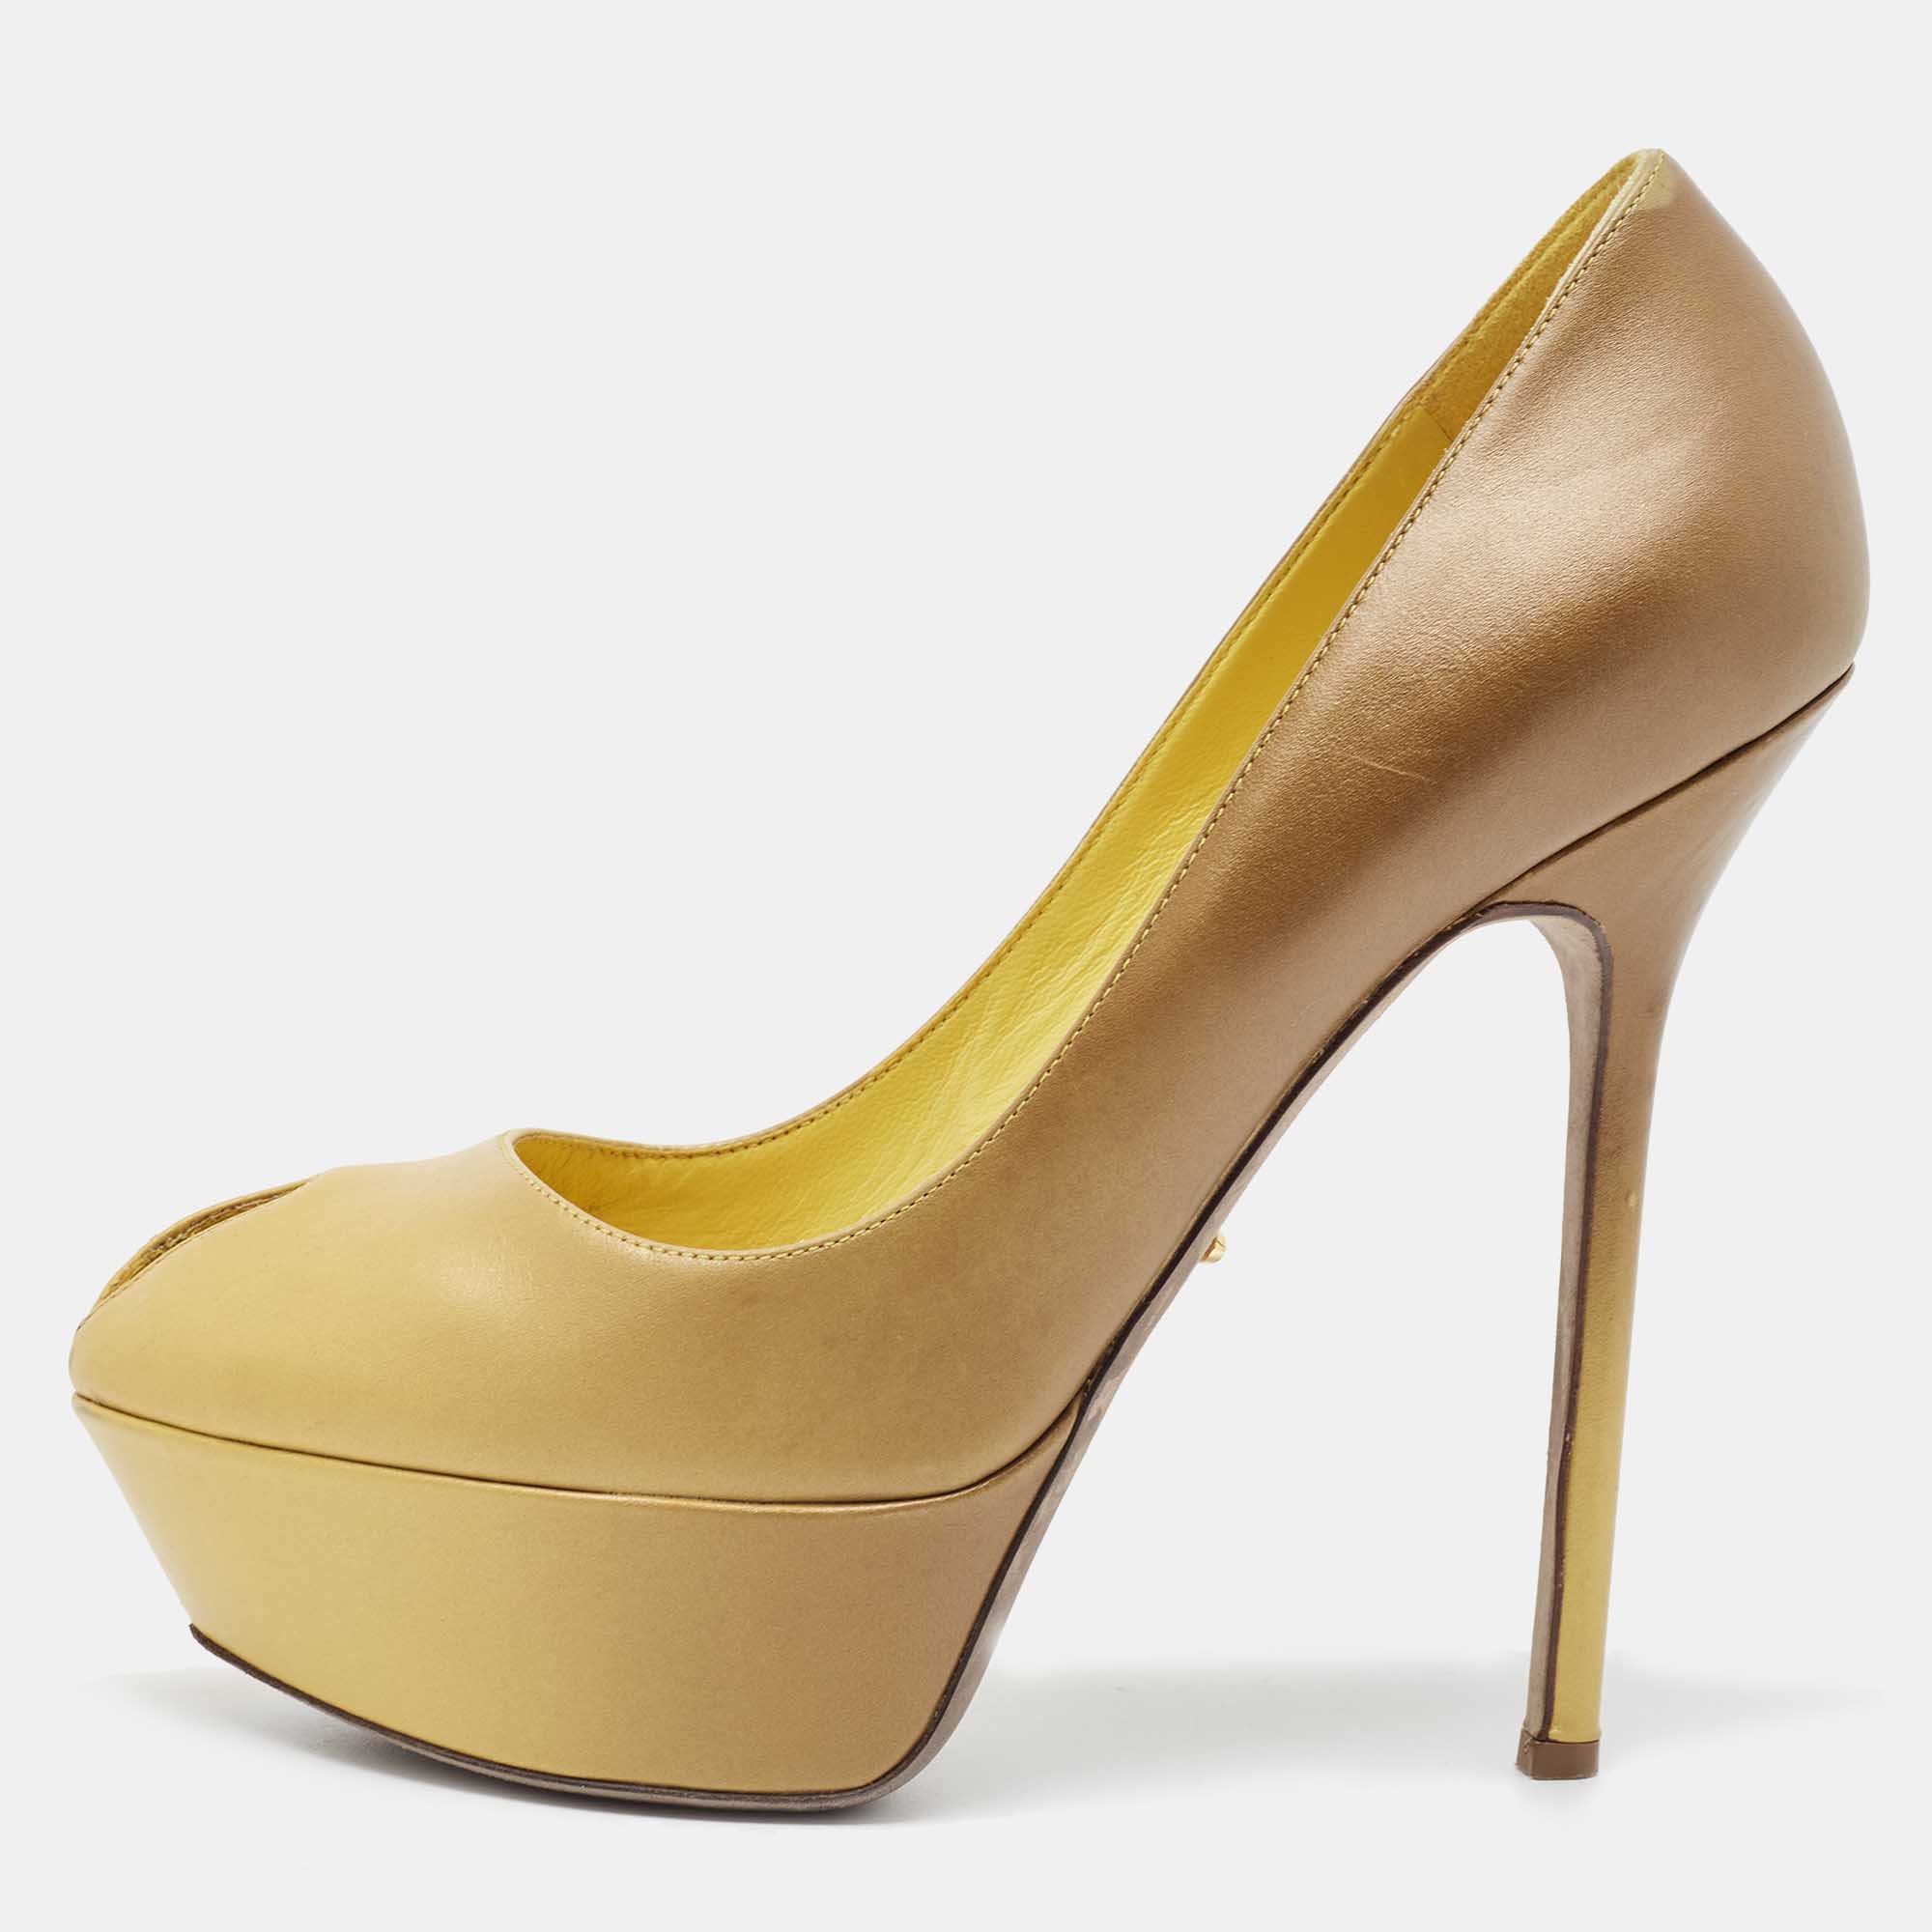 Pre-owned Sergio Rossi Yellow Leather Peep Toe Platform Pumps Size 37